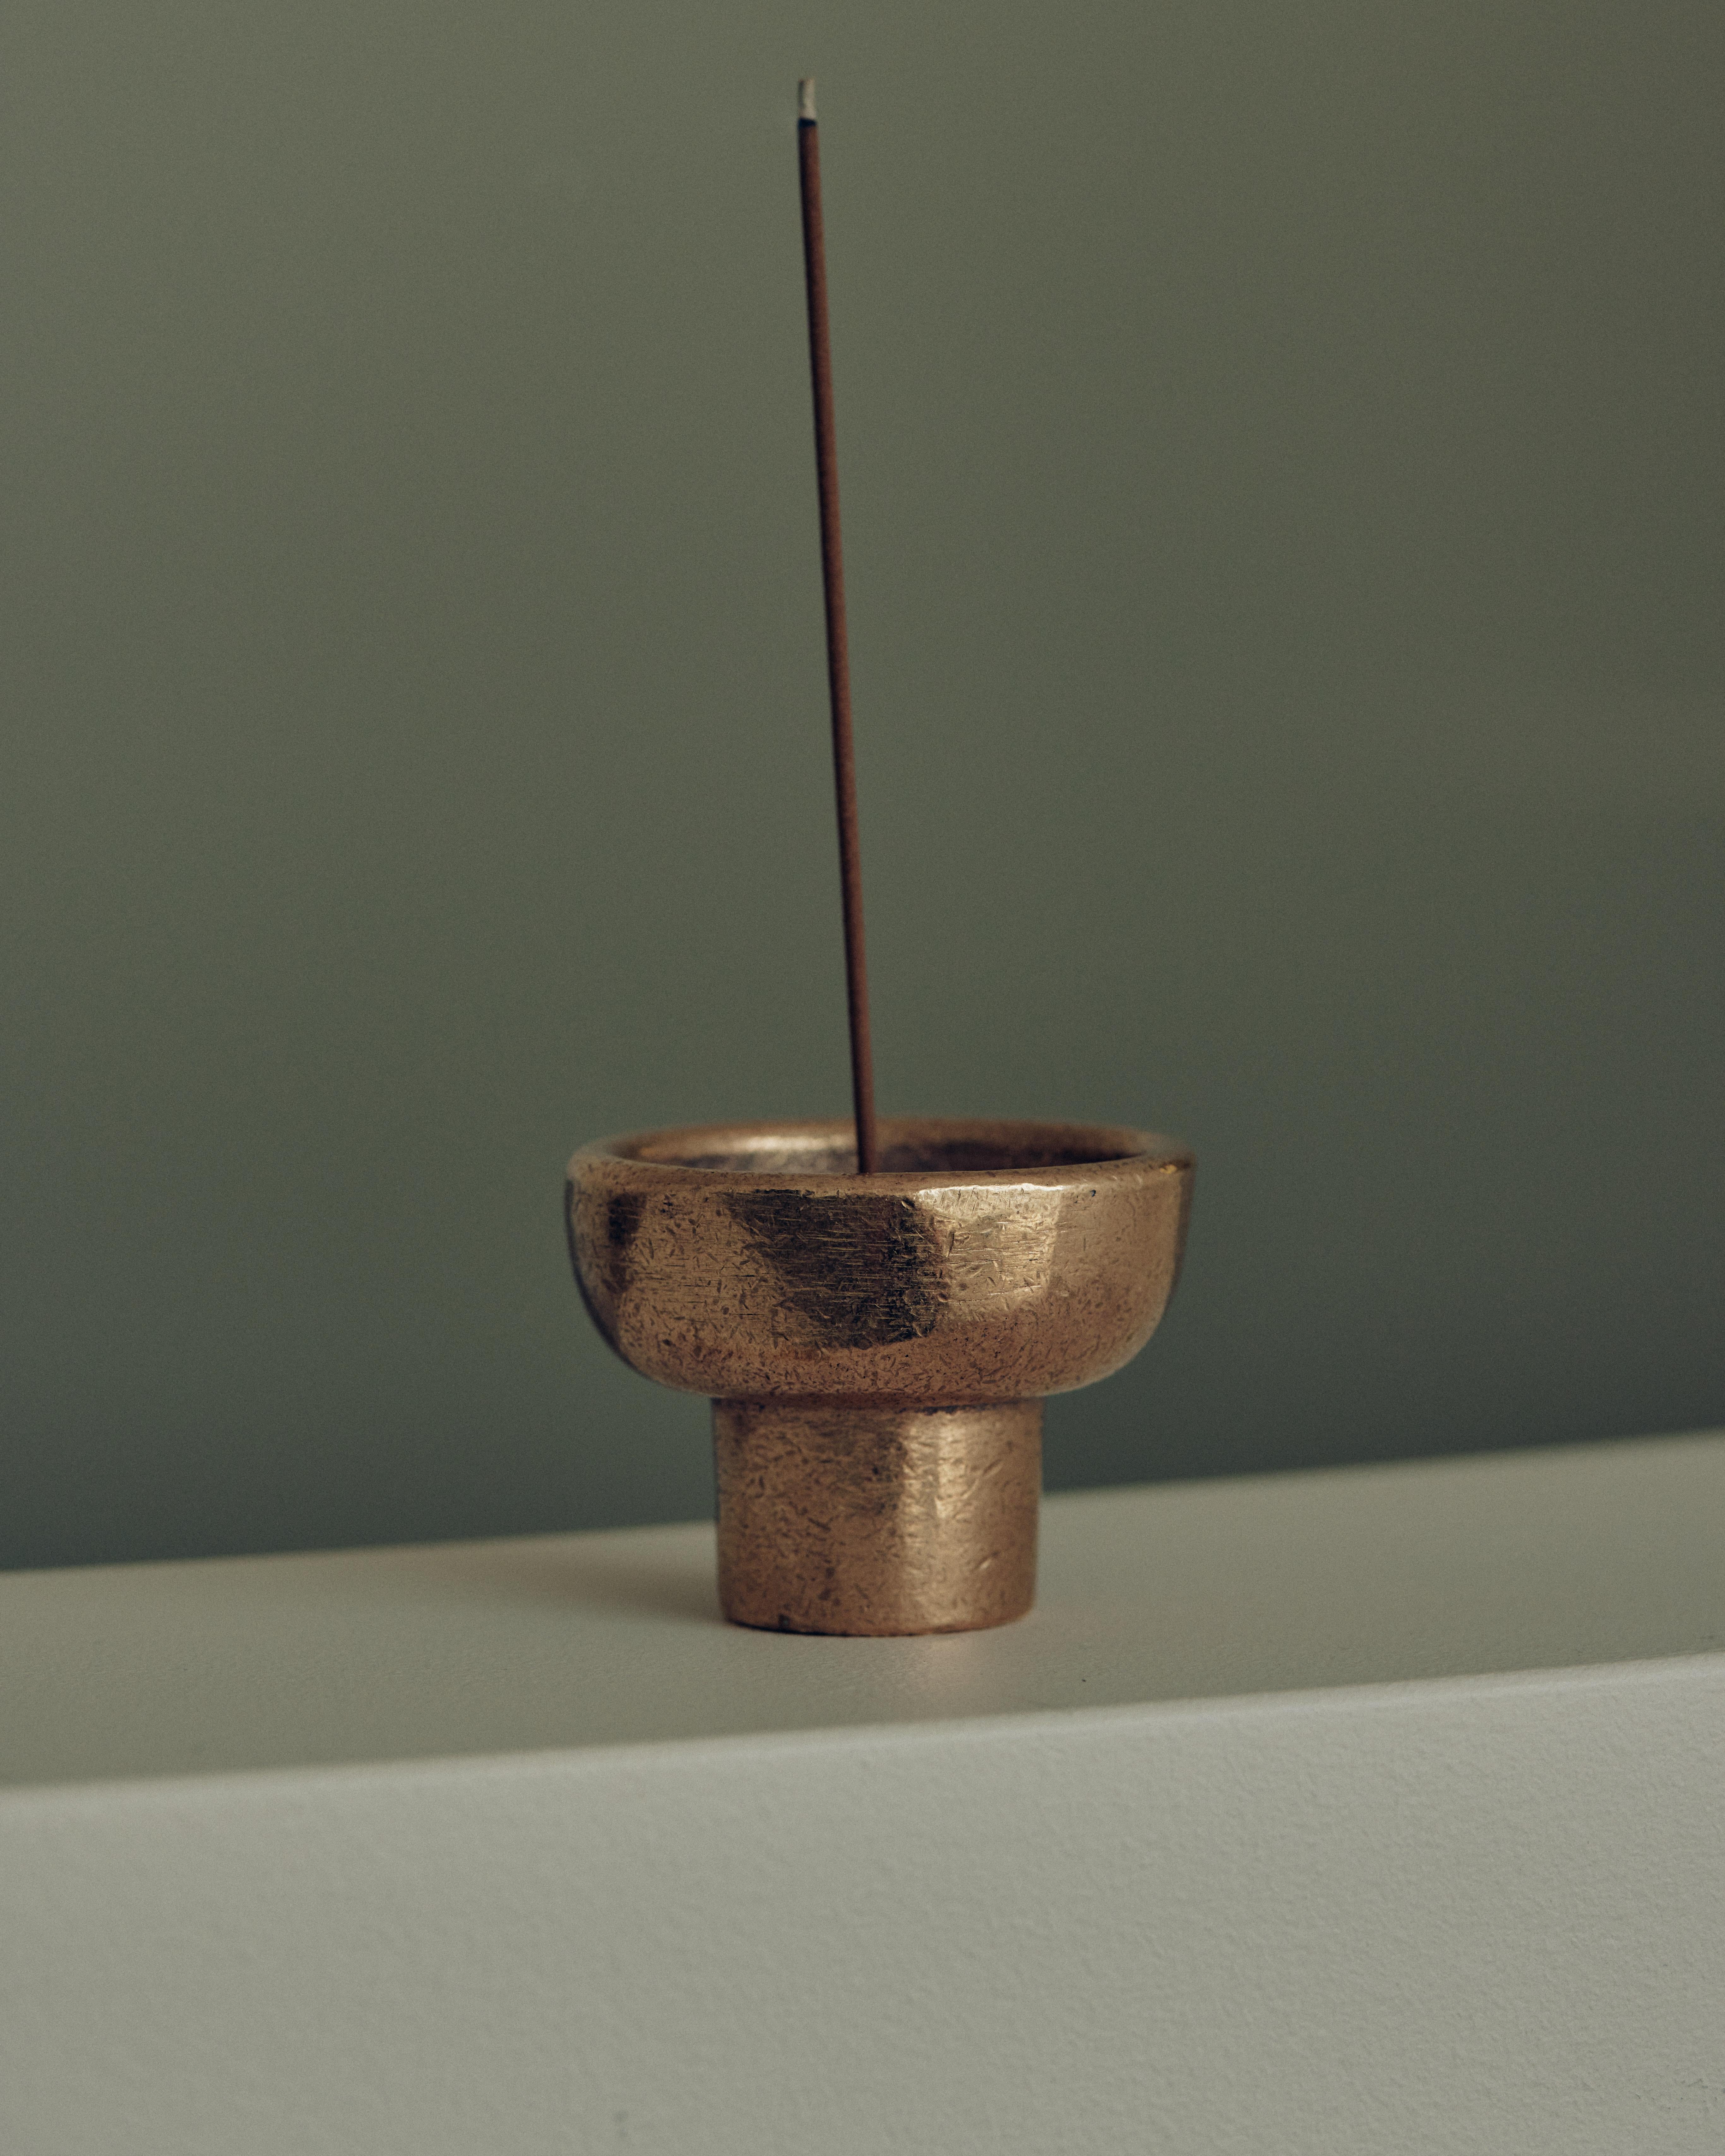 Bronze Incense Burner by Henry Wilson
Dimensions: D 6 x H 5 cm
Materials: Bronze

The Incense Burner was initially designed for Perfumer H. The piece is sand cast in solid Bronze and hand finished. 

The incense ash is collected in the base of the